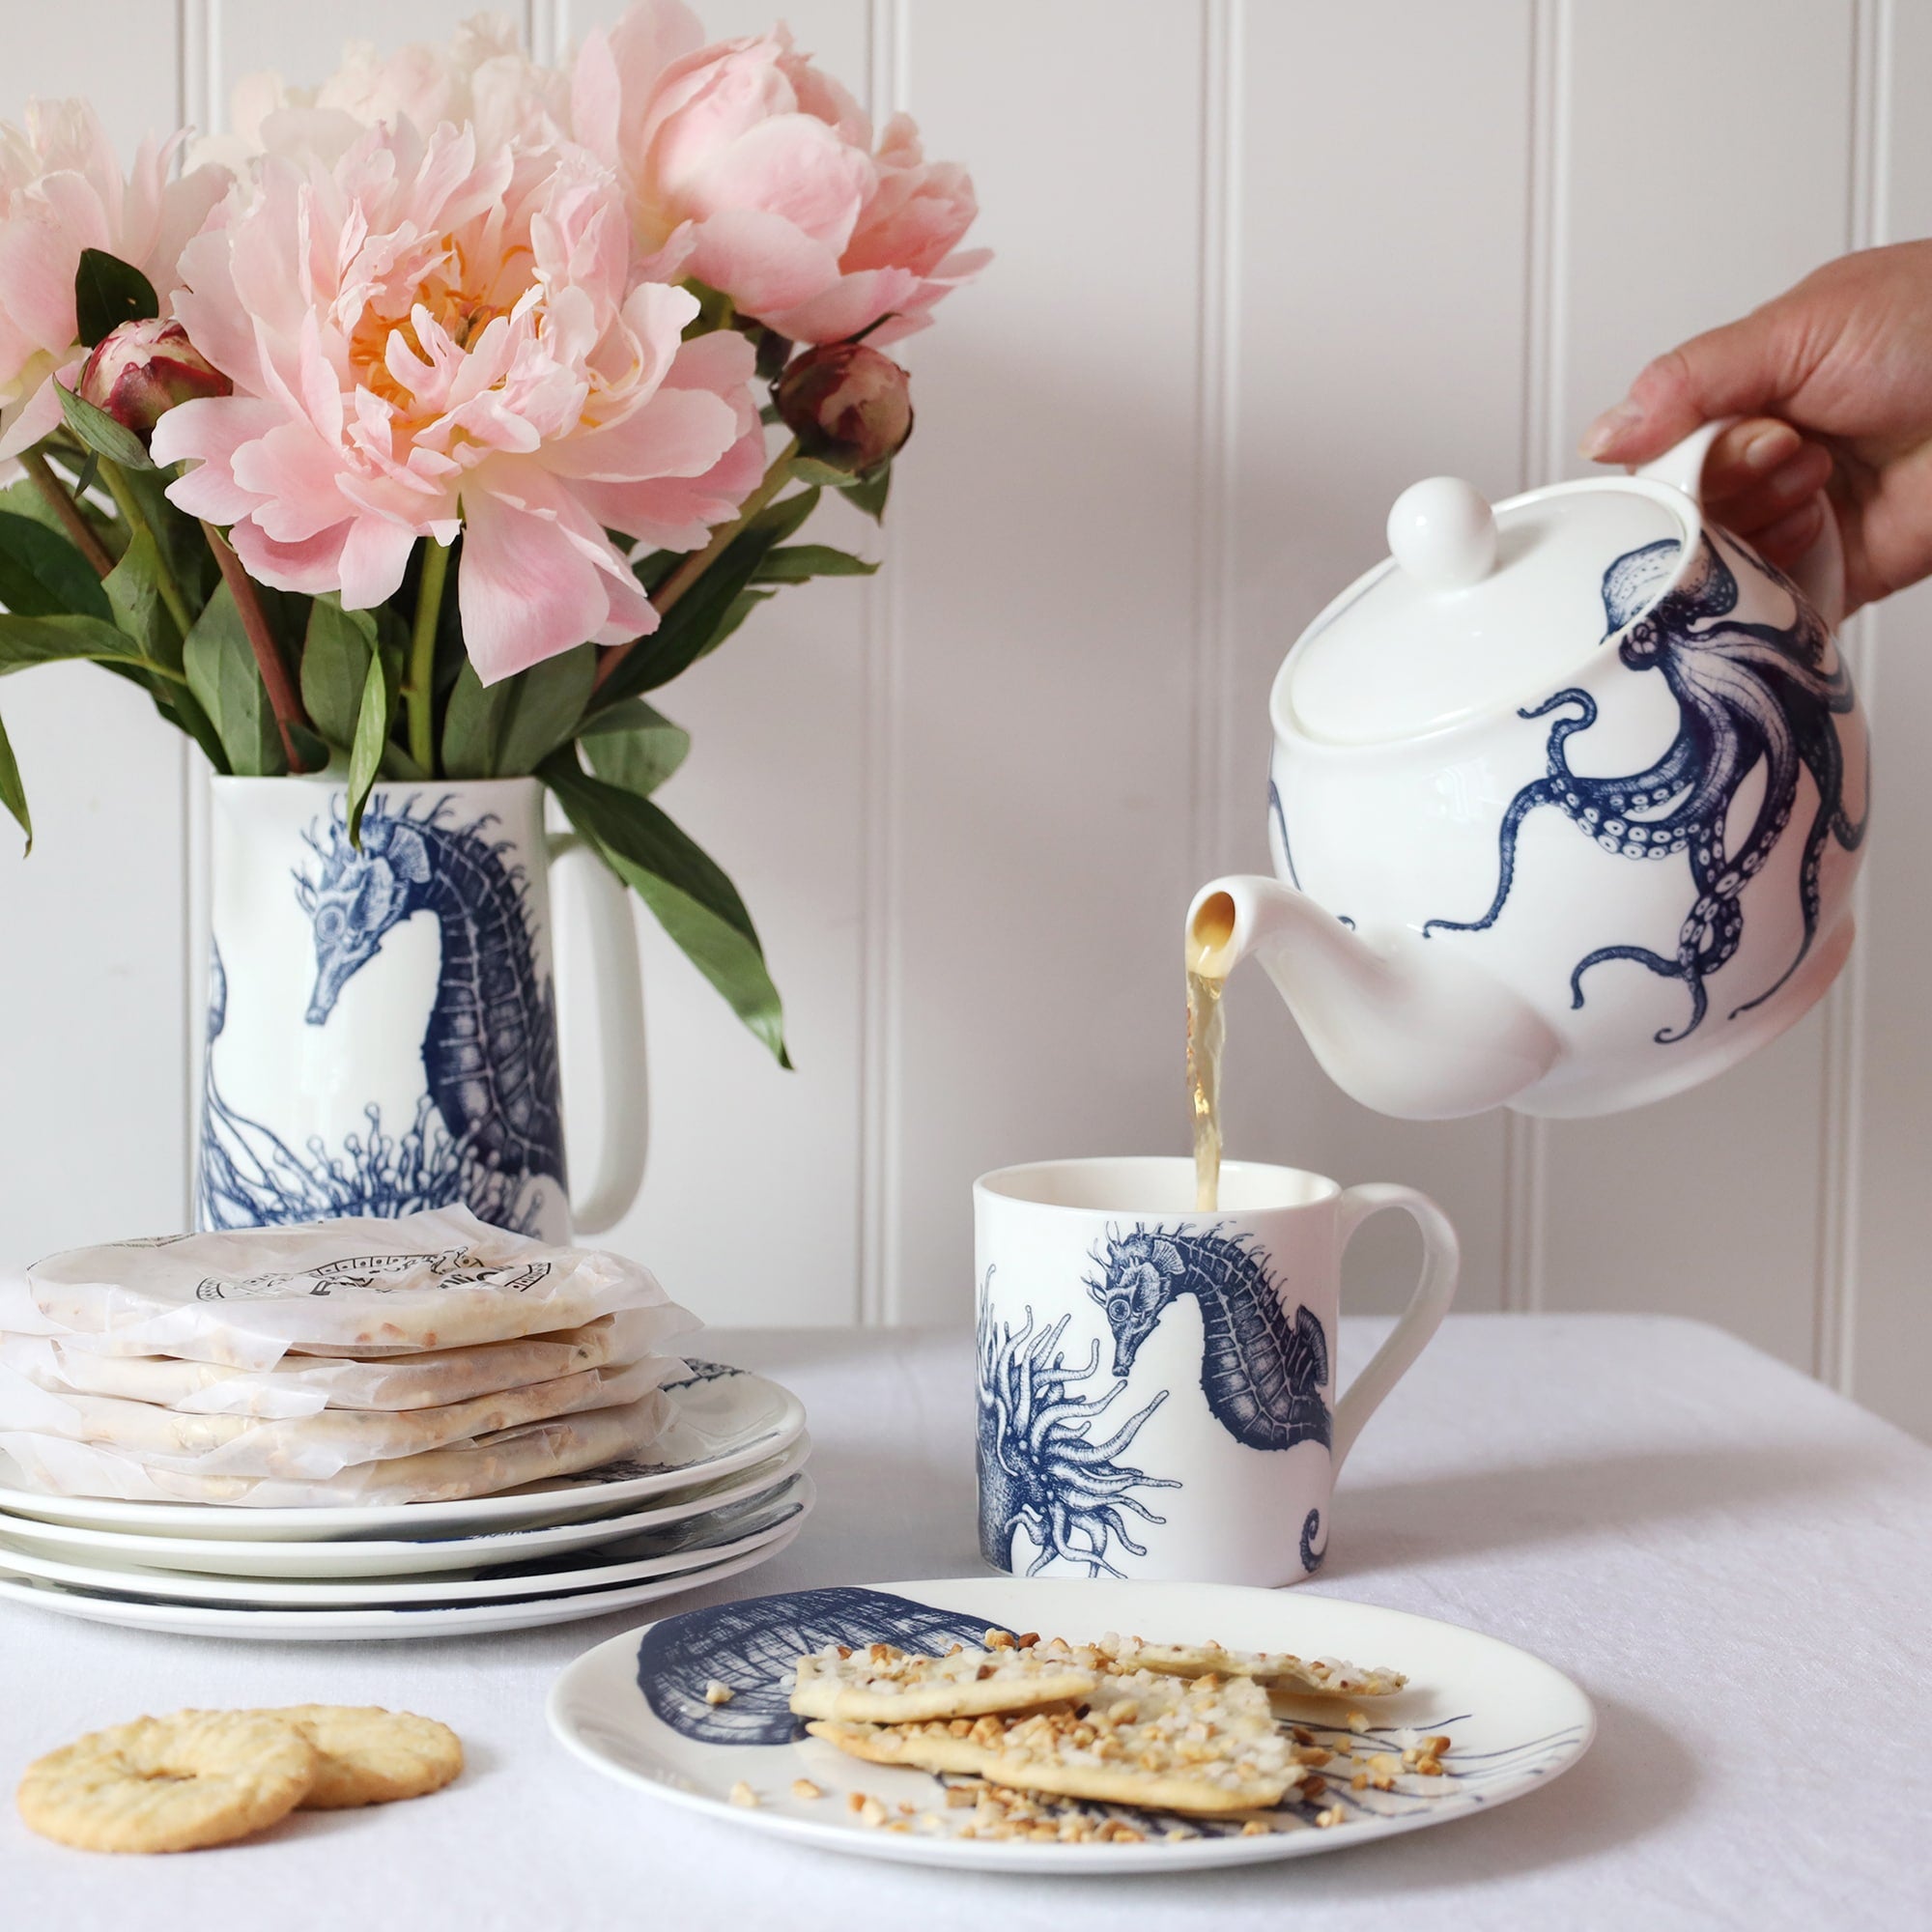 A blue & white informal; table setting set against a white shiplap wall and linen tablecloth. An octopus design adorns a teapot which is pouring tea into a white bone china mug decorated with a blue illustrated seahorse, anemone & scallop shell mug.